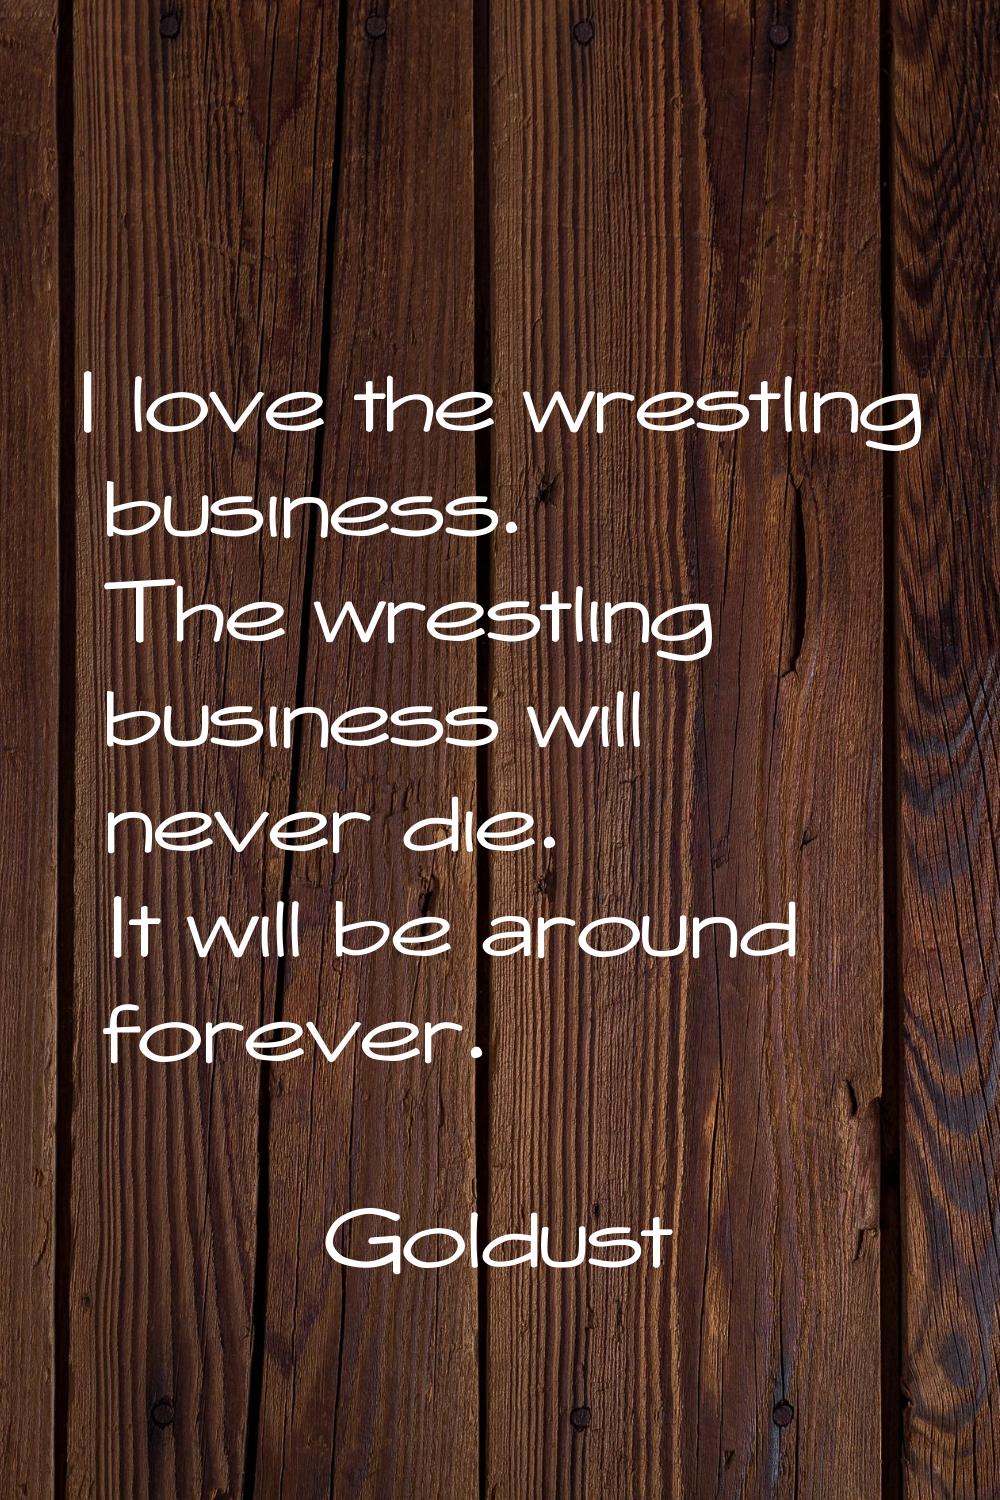 I love the wrestling business. The wrestling business will never die. It will be around forever.